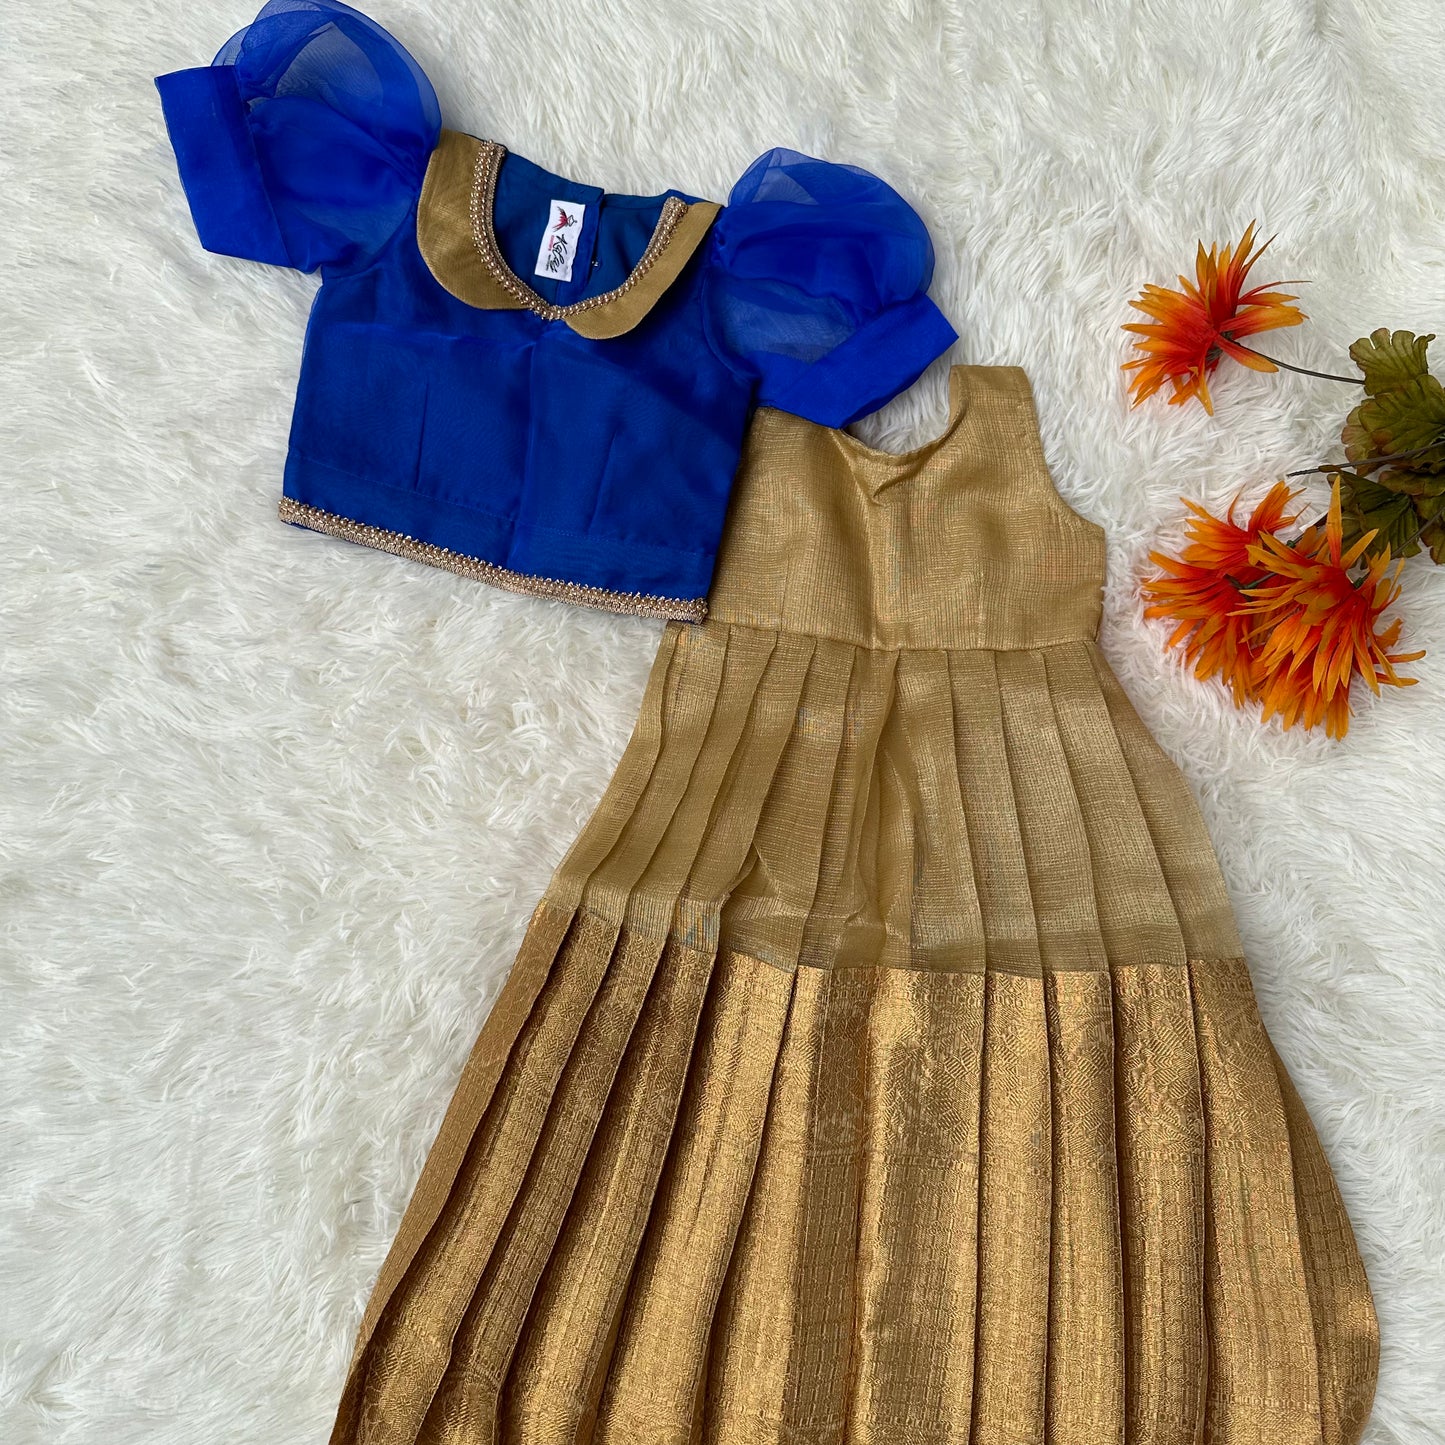 Golden Tissue Frock with Royal Blue Top - A Luxurious Ensemble